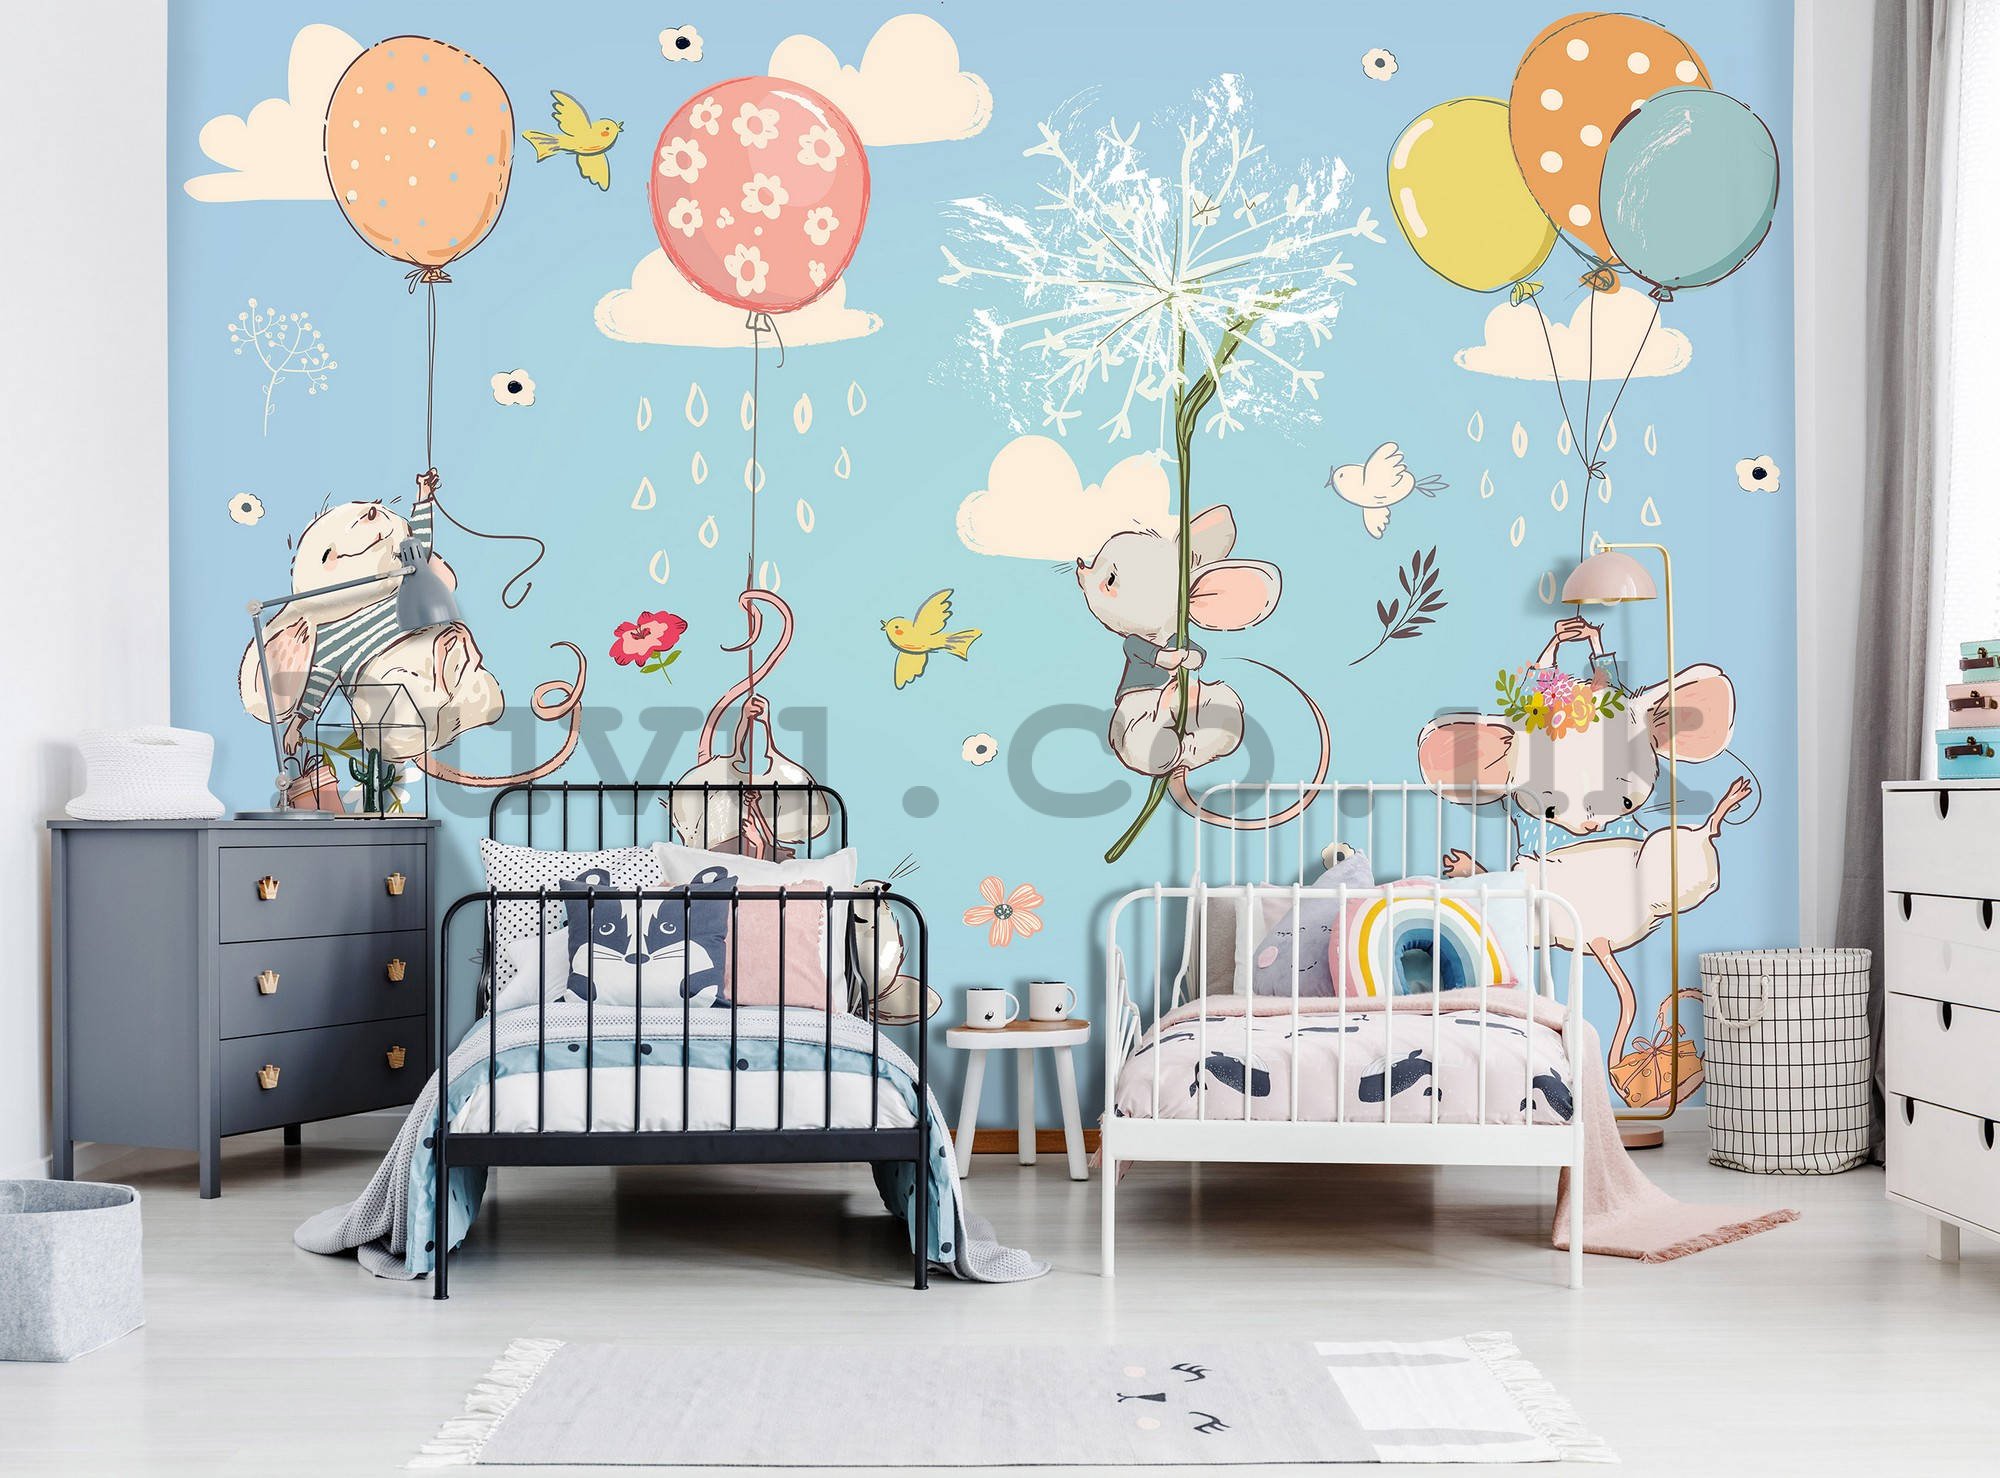 Wall mural vlies: Little mice in the clouds - 152,5x104 cm